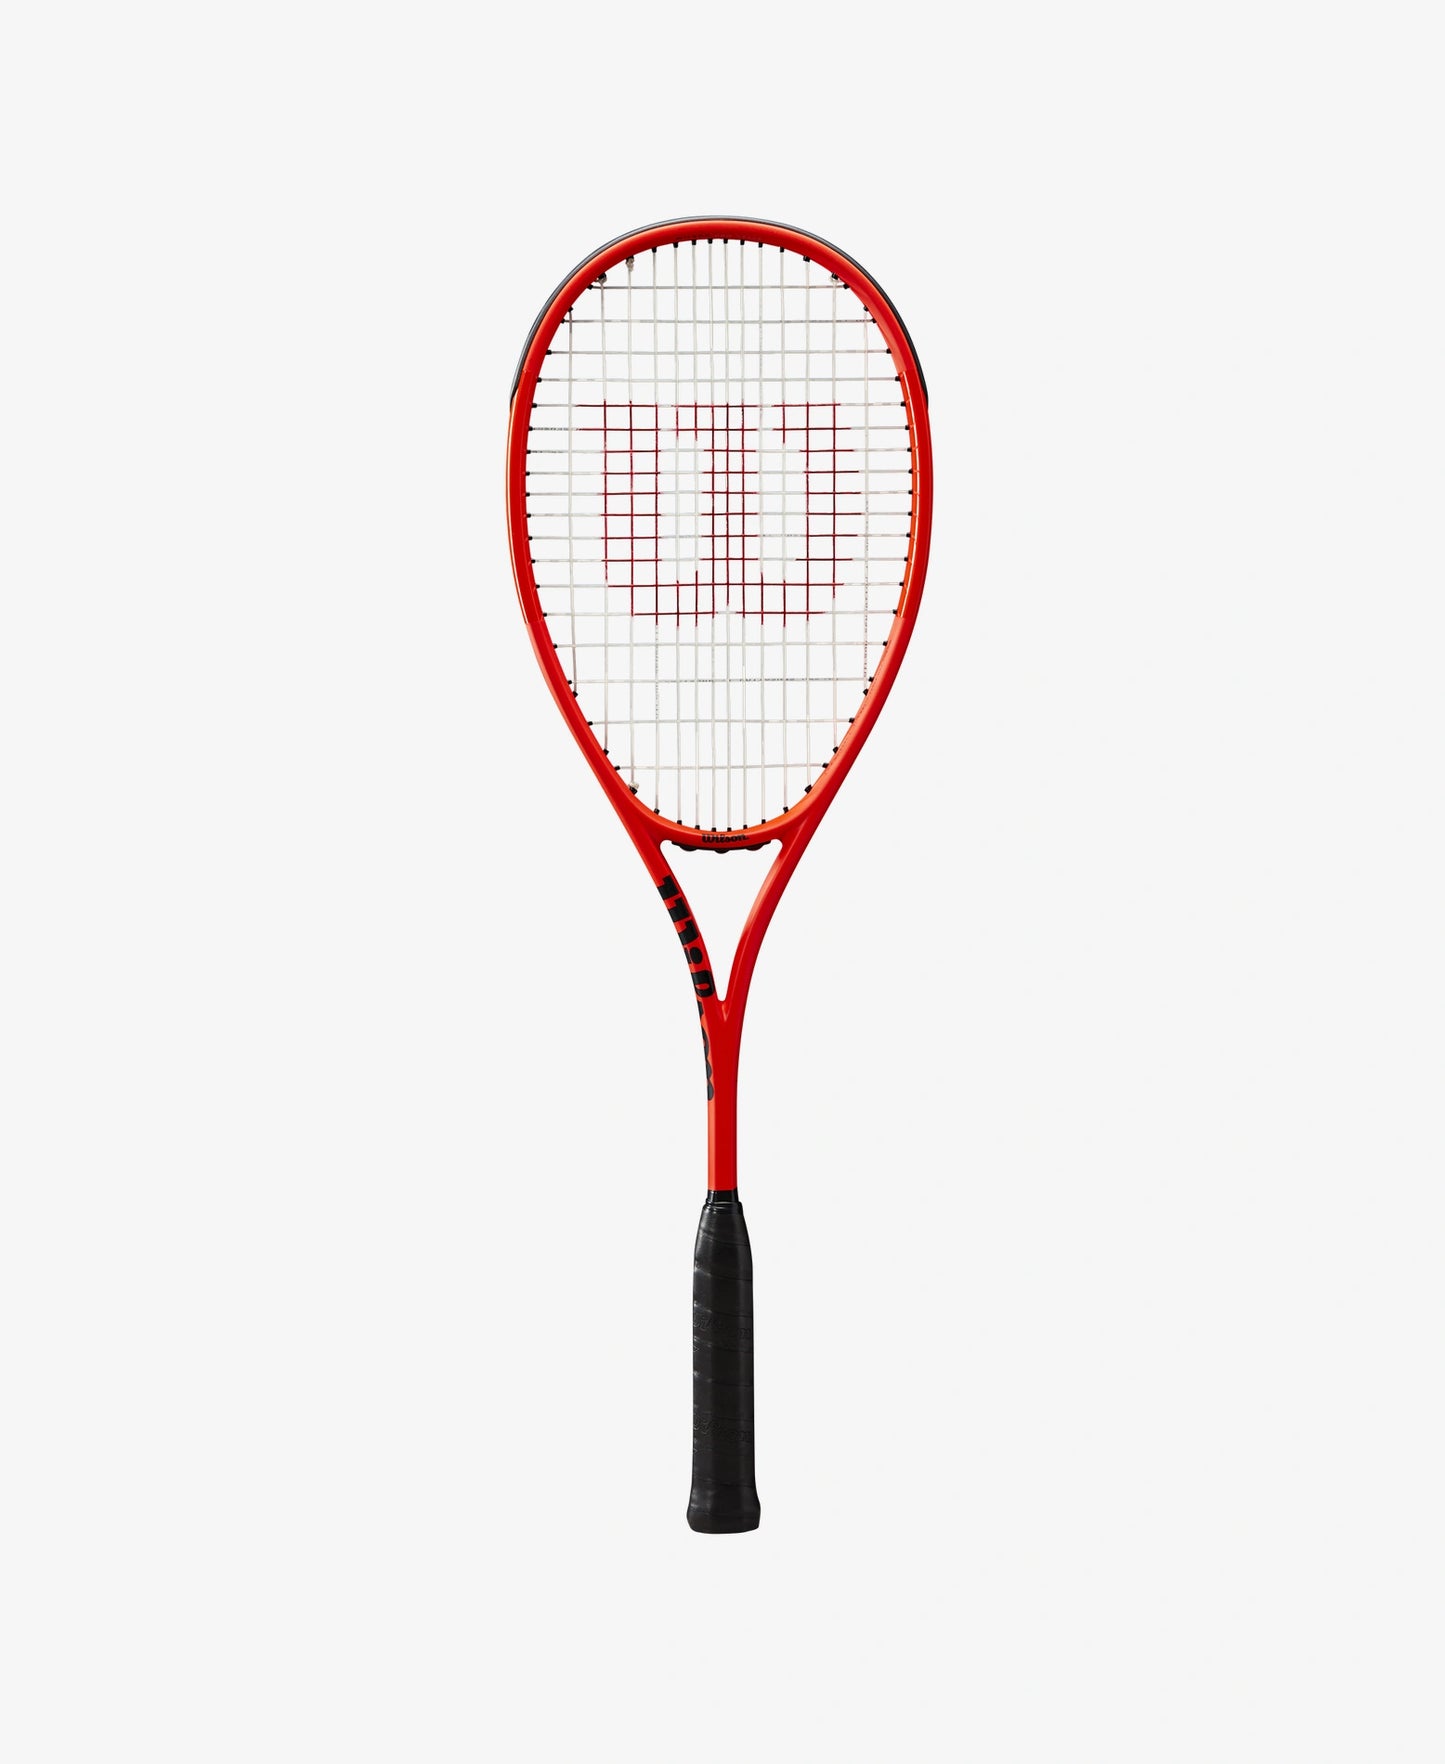 Wilson Pro Staff UL Squash Racket available for sale at GSM Sports.   